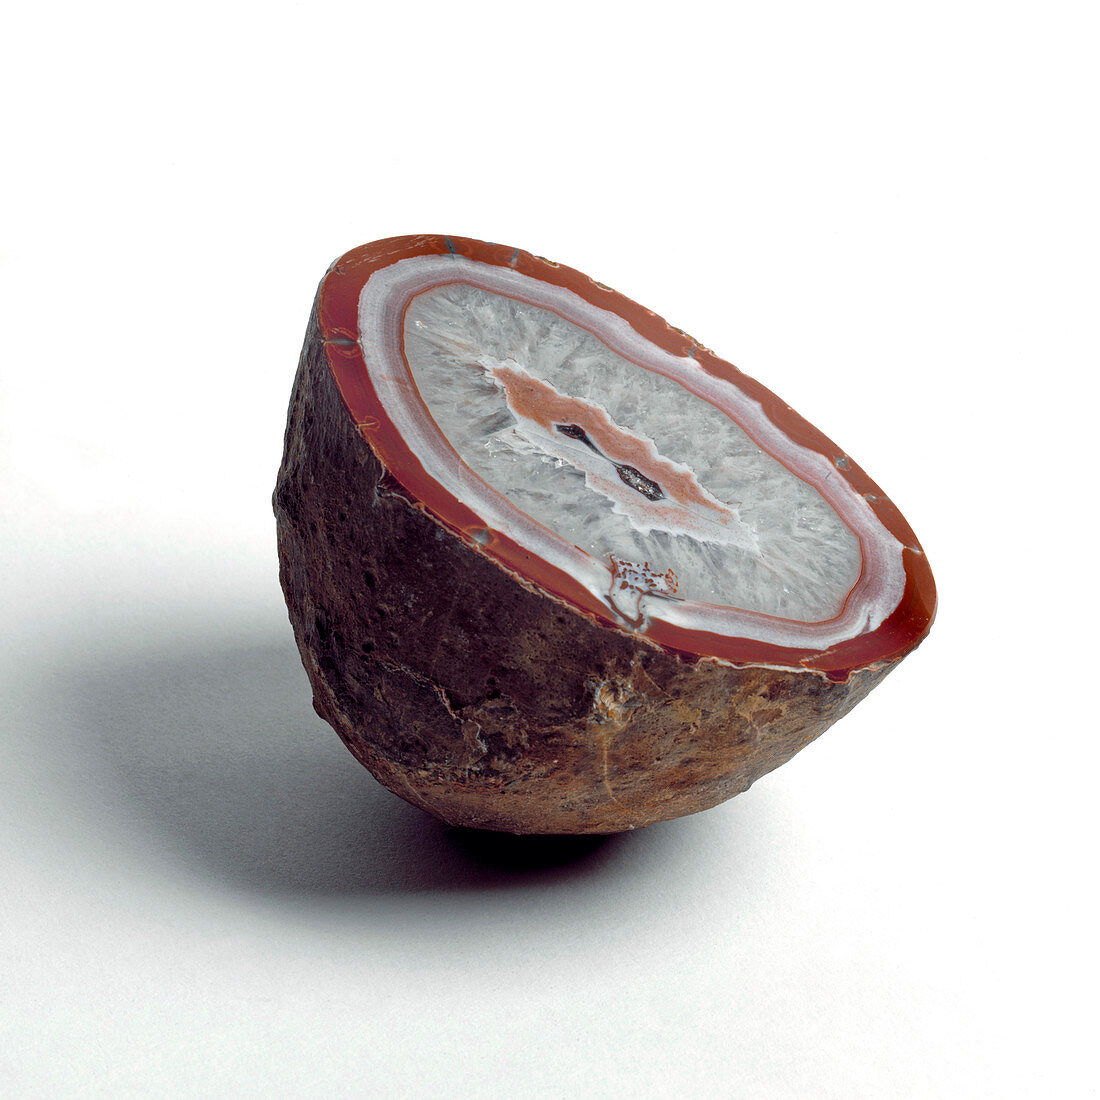 Cross section of jasp agate